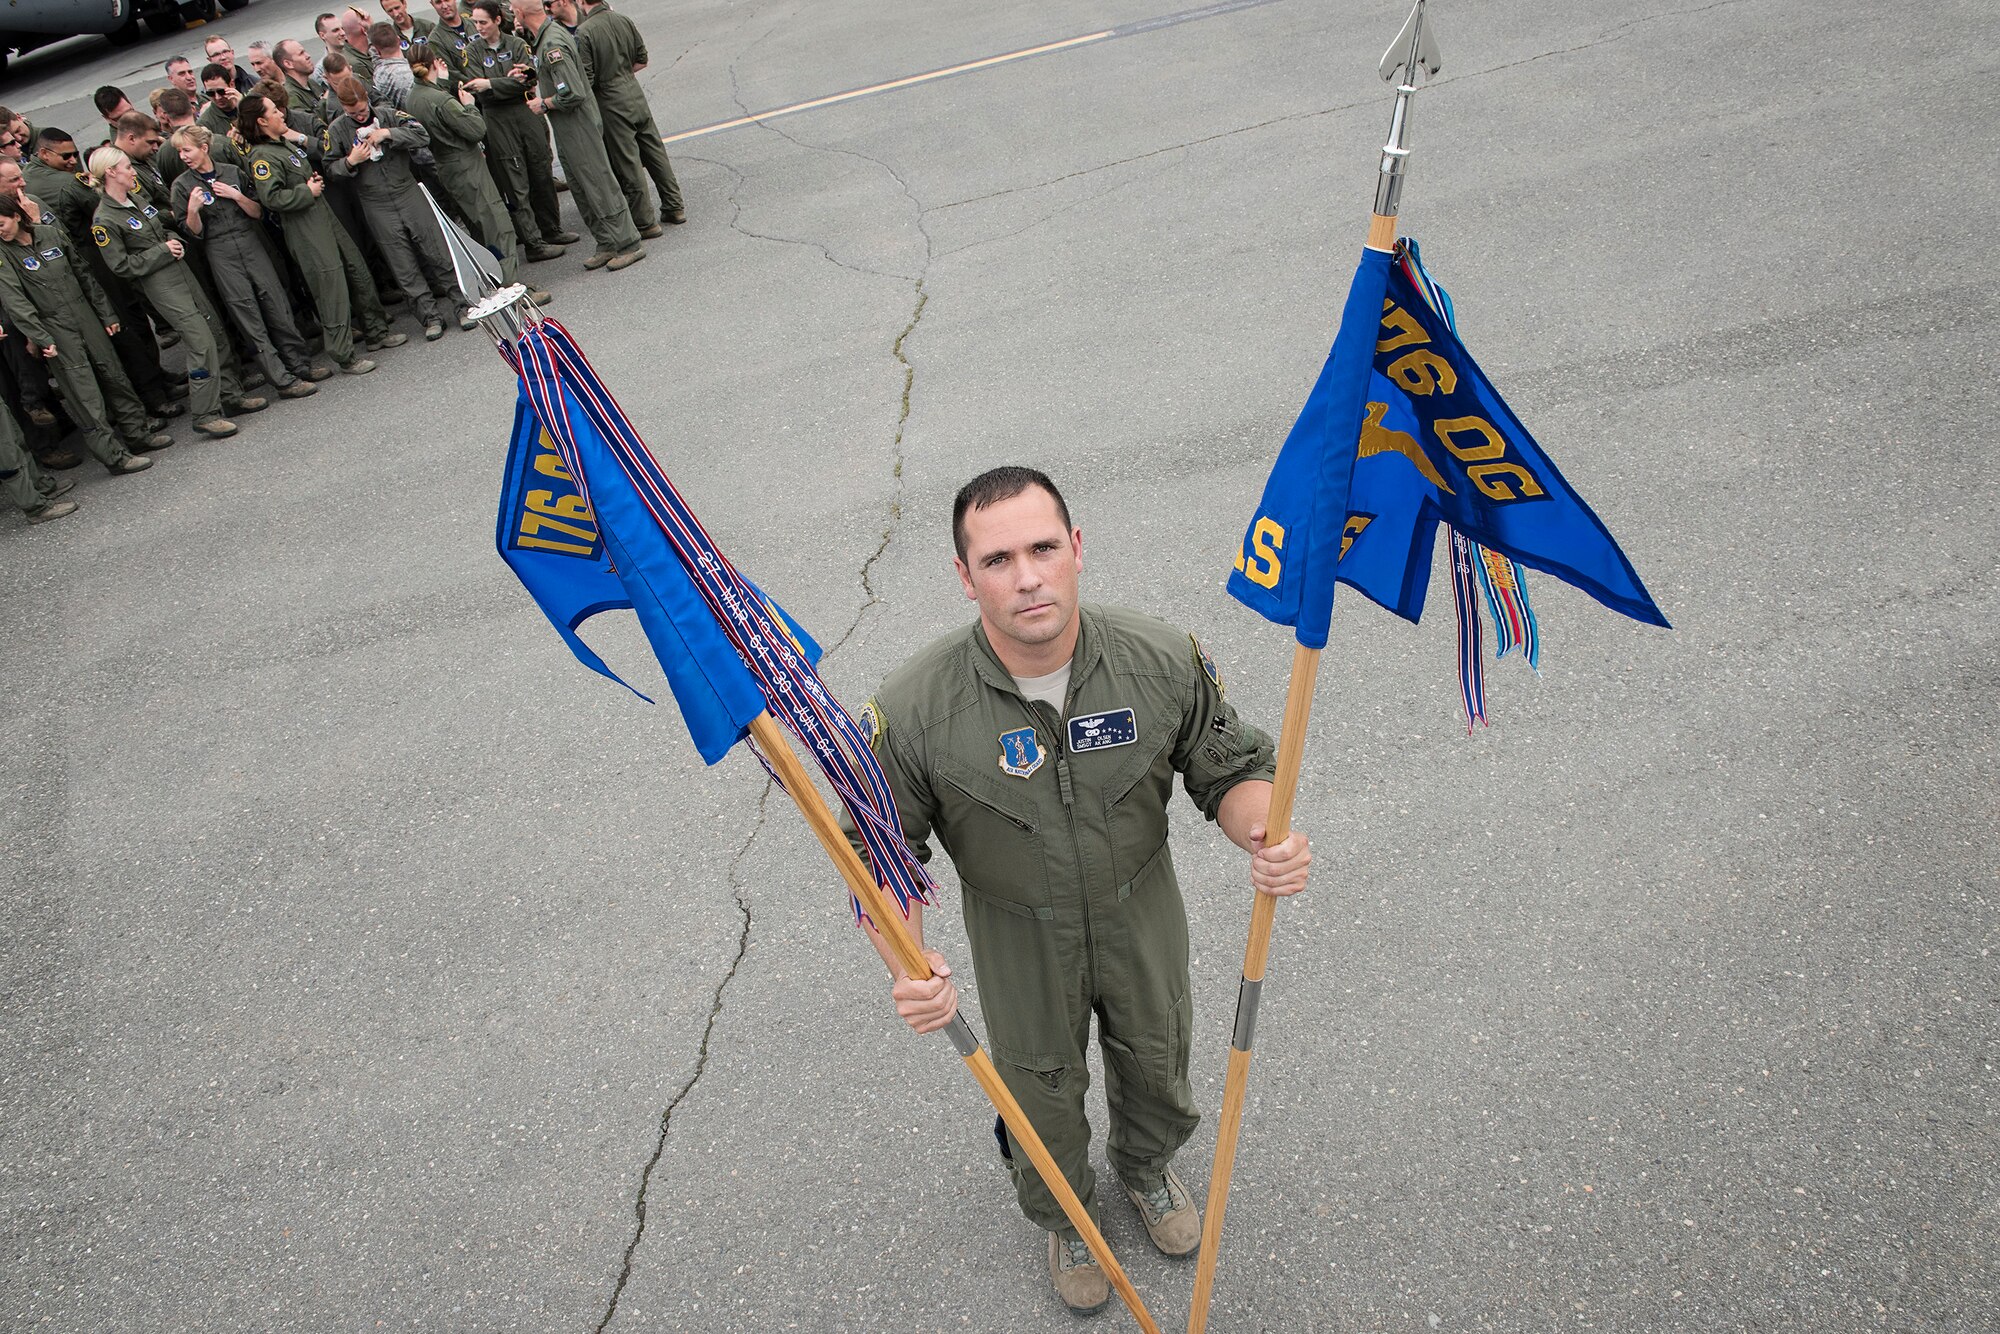 144th Airlift Squadron is historic nucleus of 176th Wing, Alaska Air National Guard